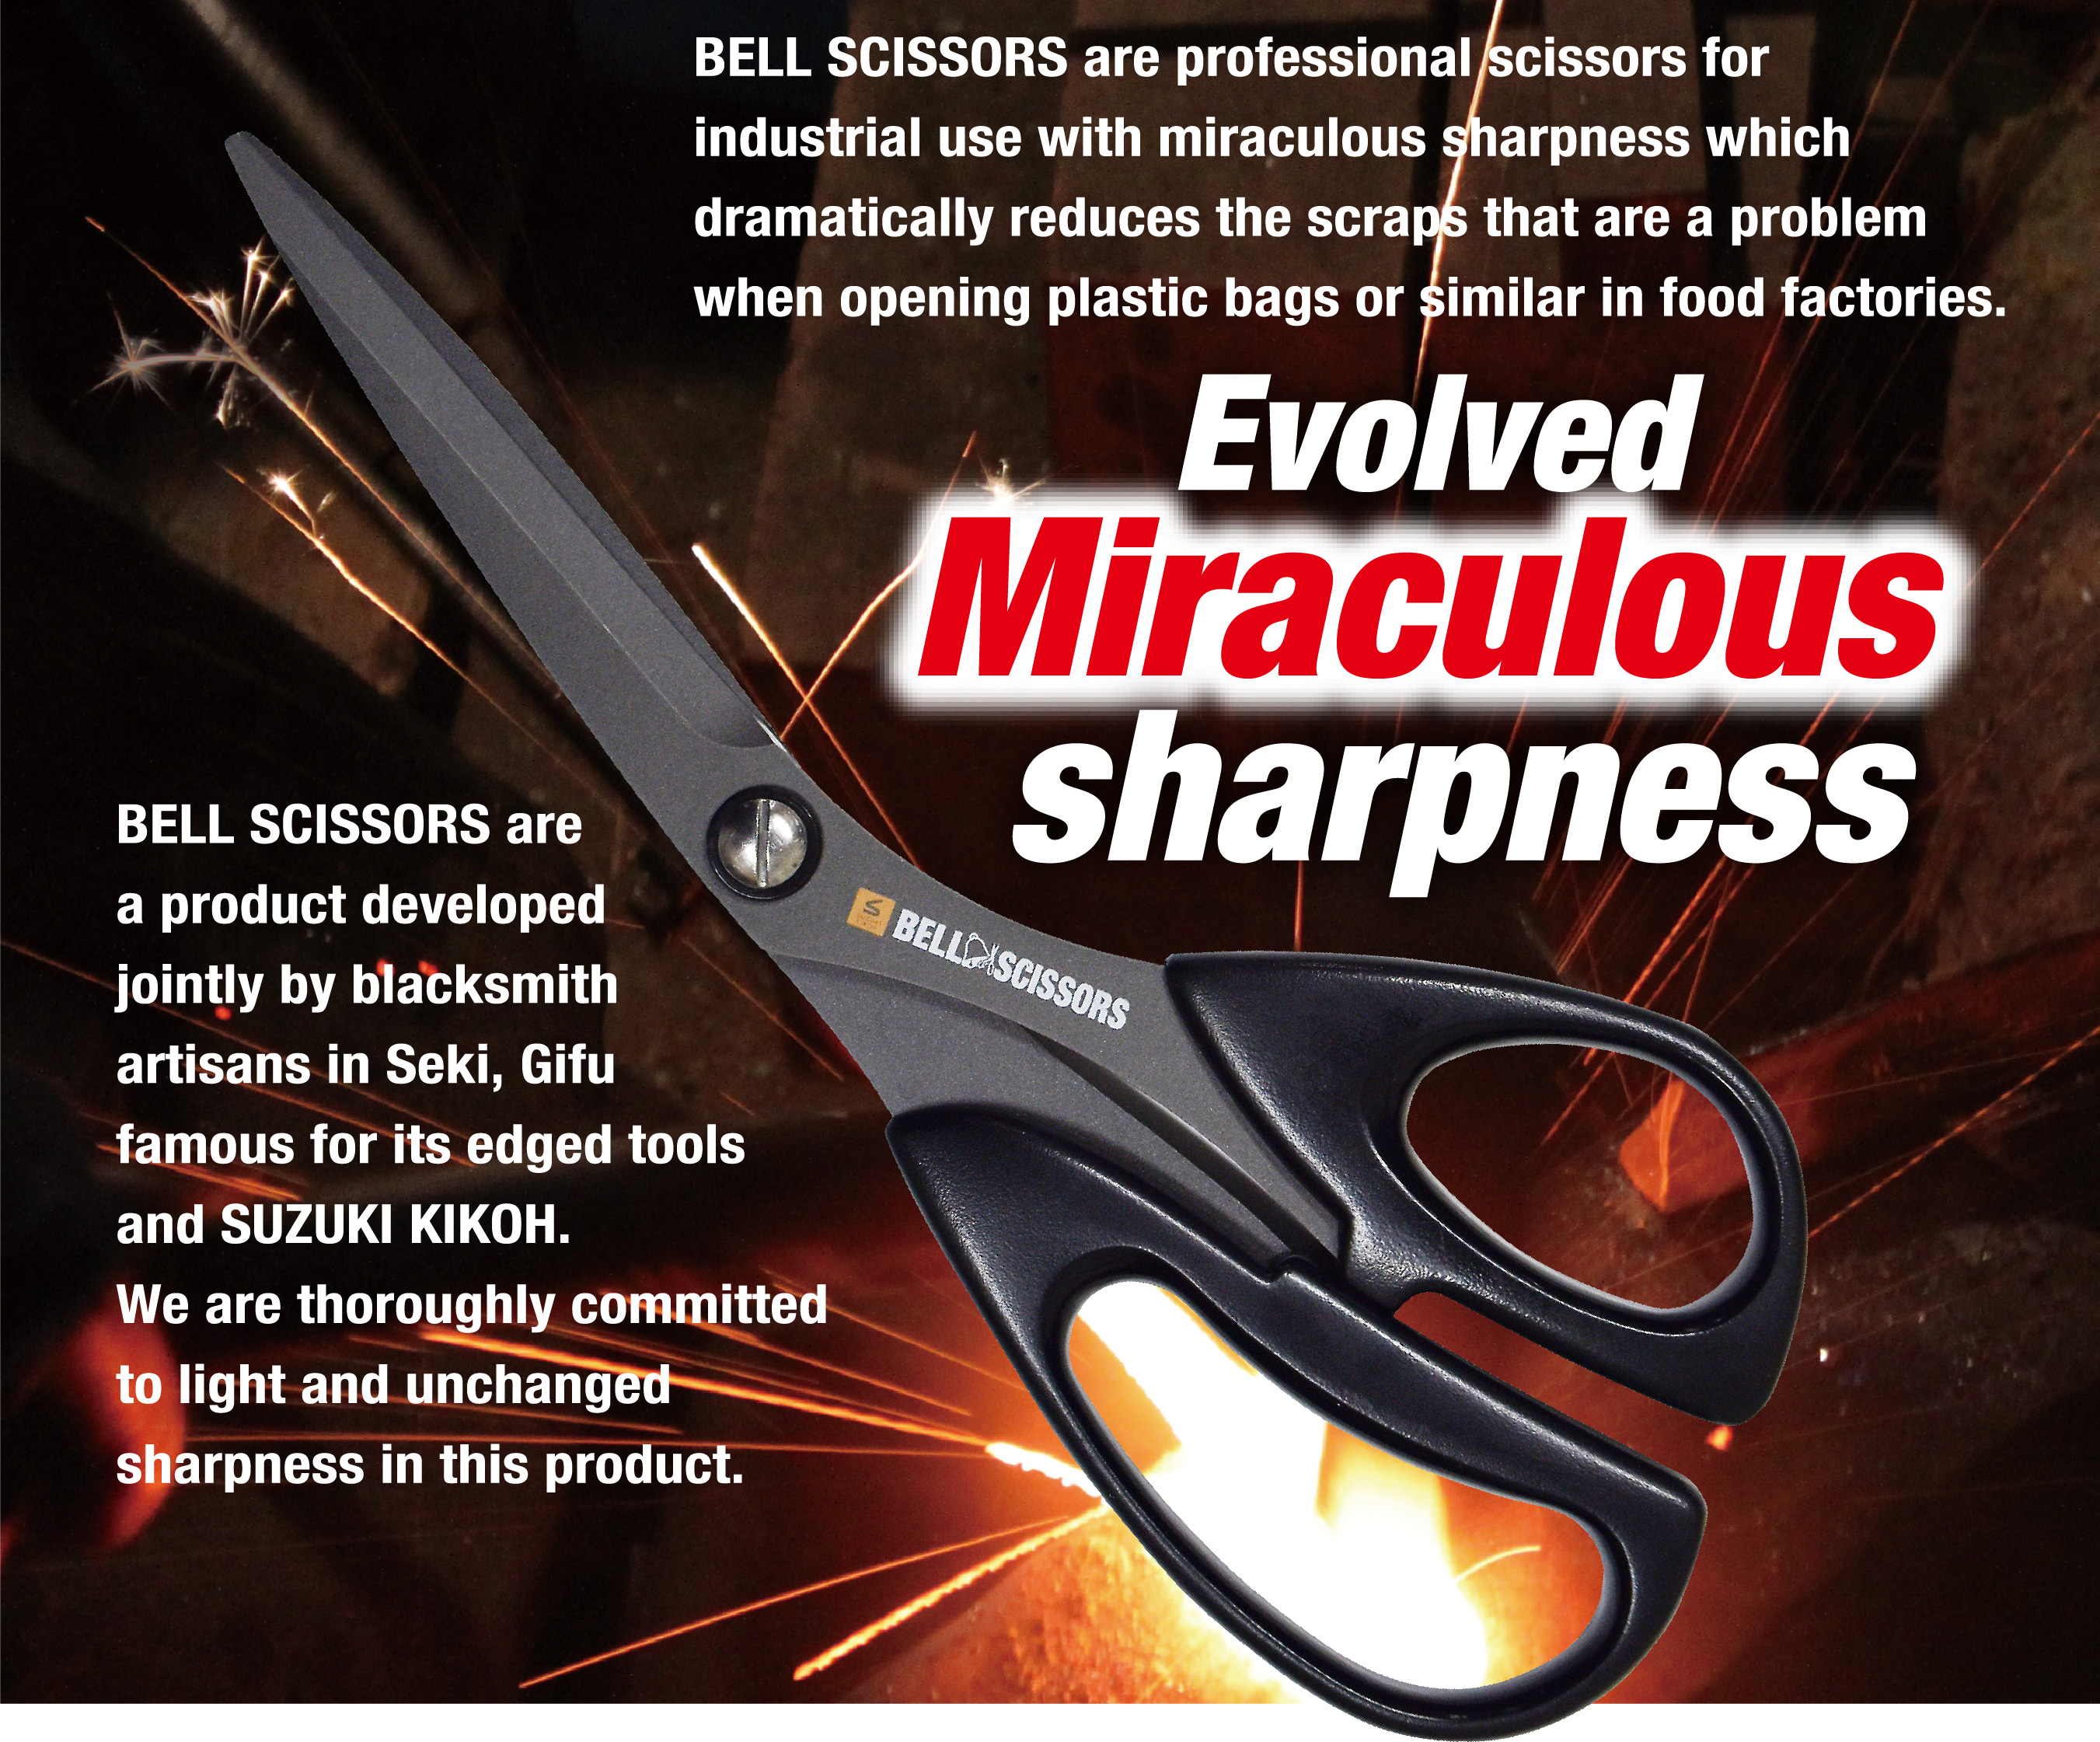 Evolved miraculous sharpness